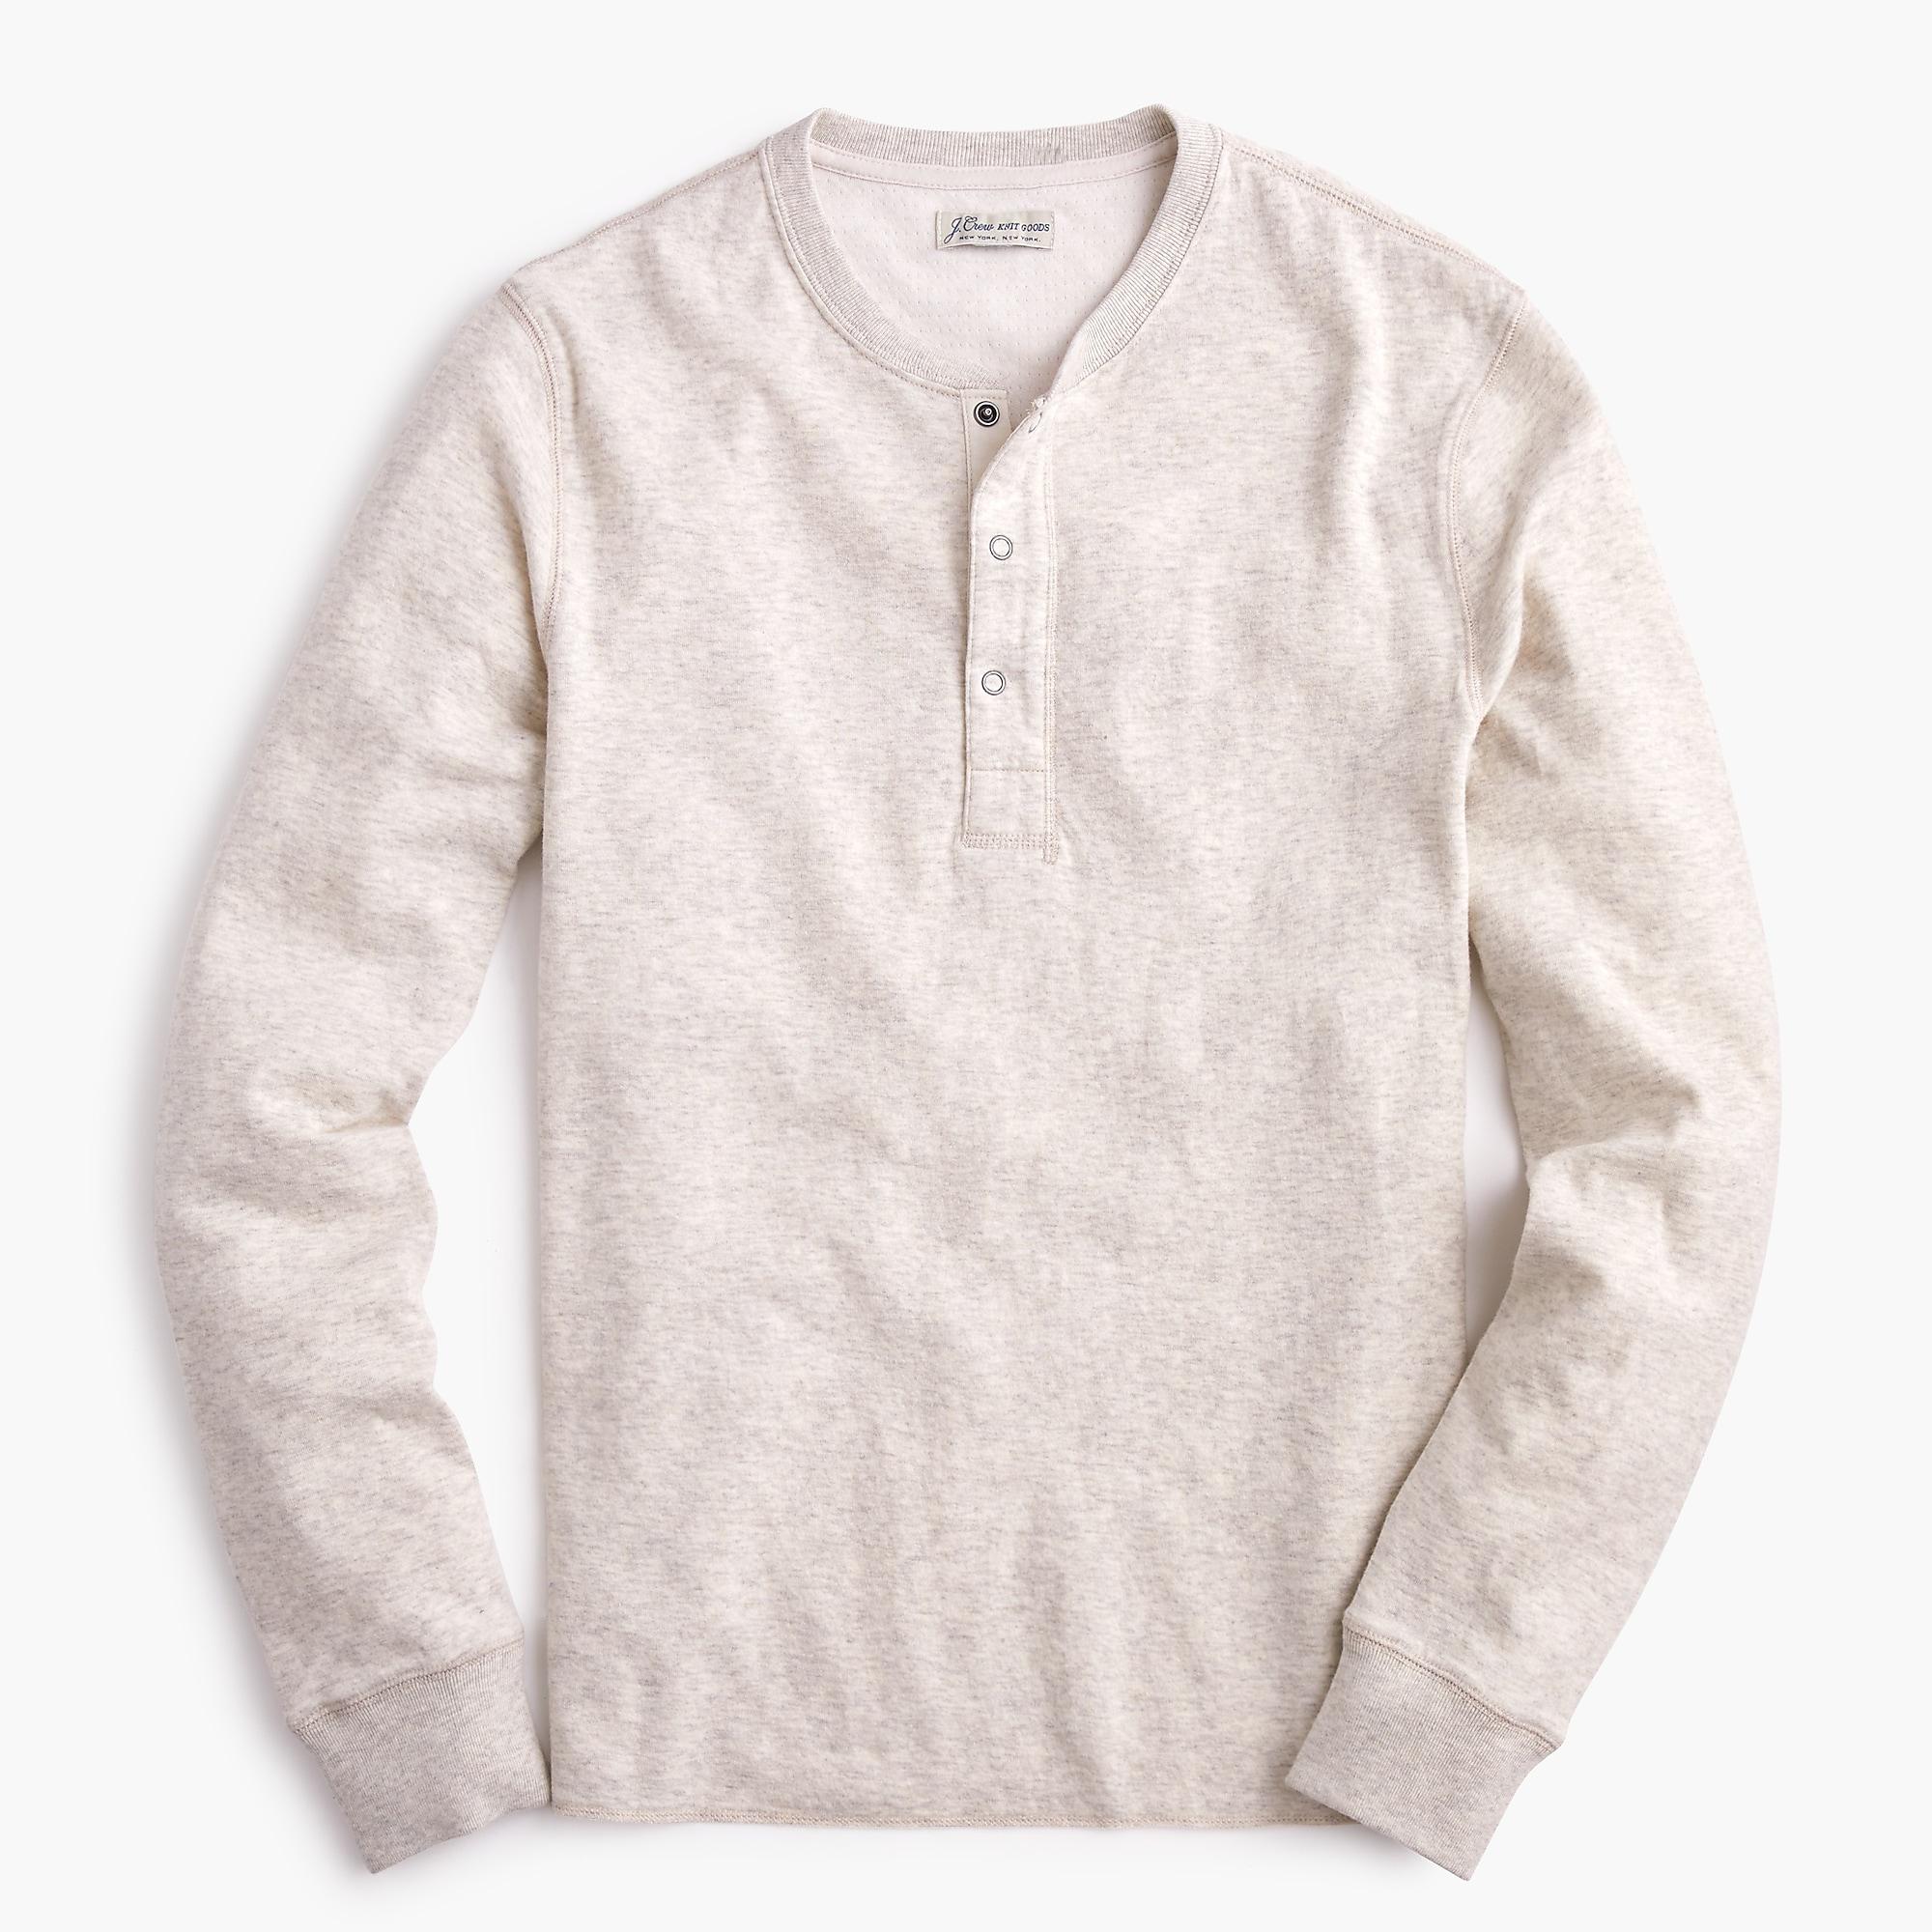 J.Crew Cotton Double-knit Henley in Natural for Men - Save 73% - Lyst